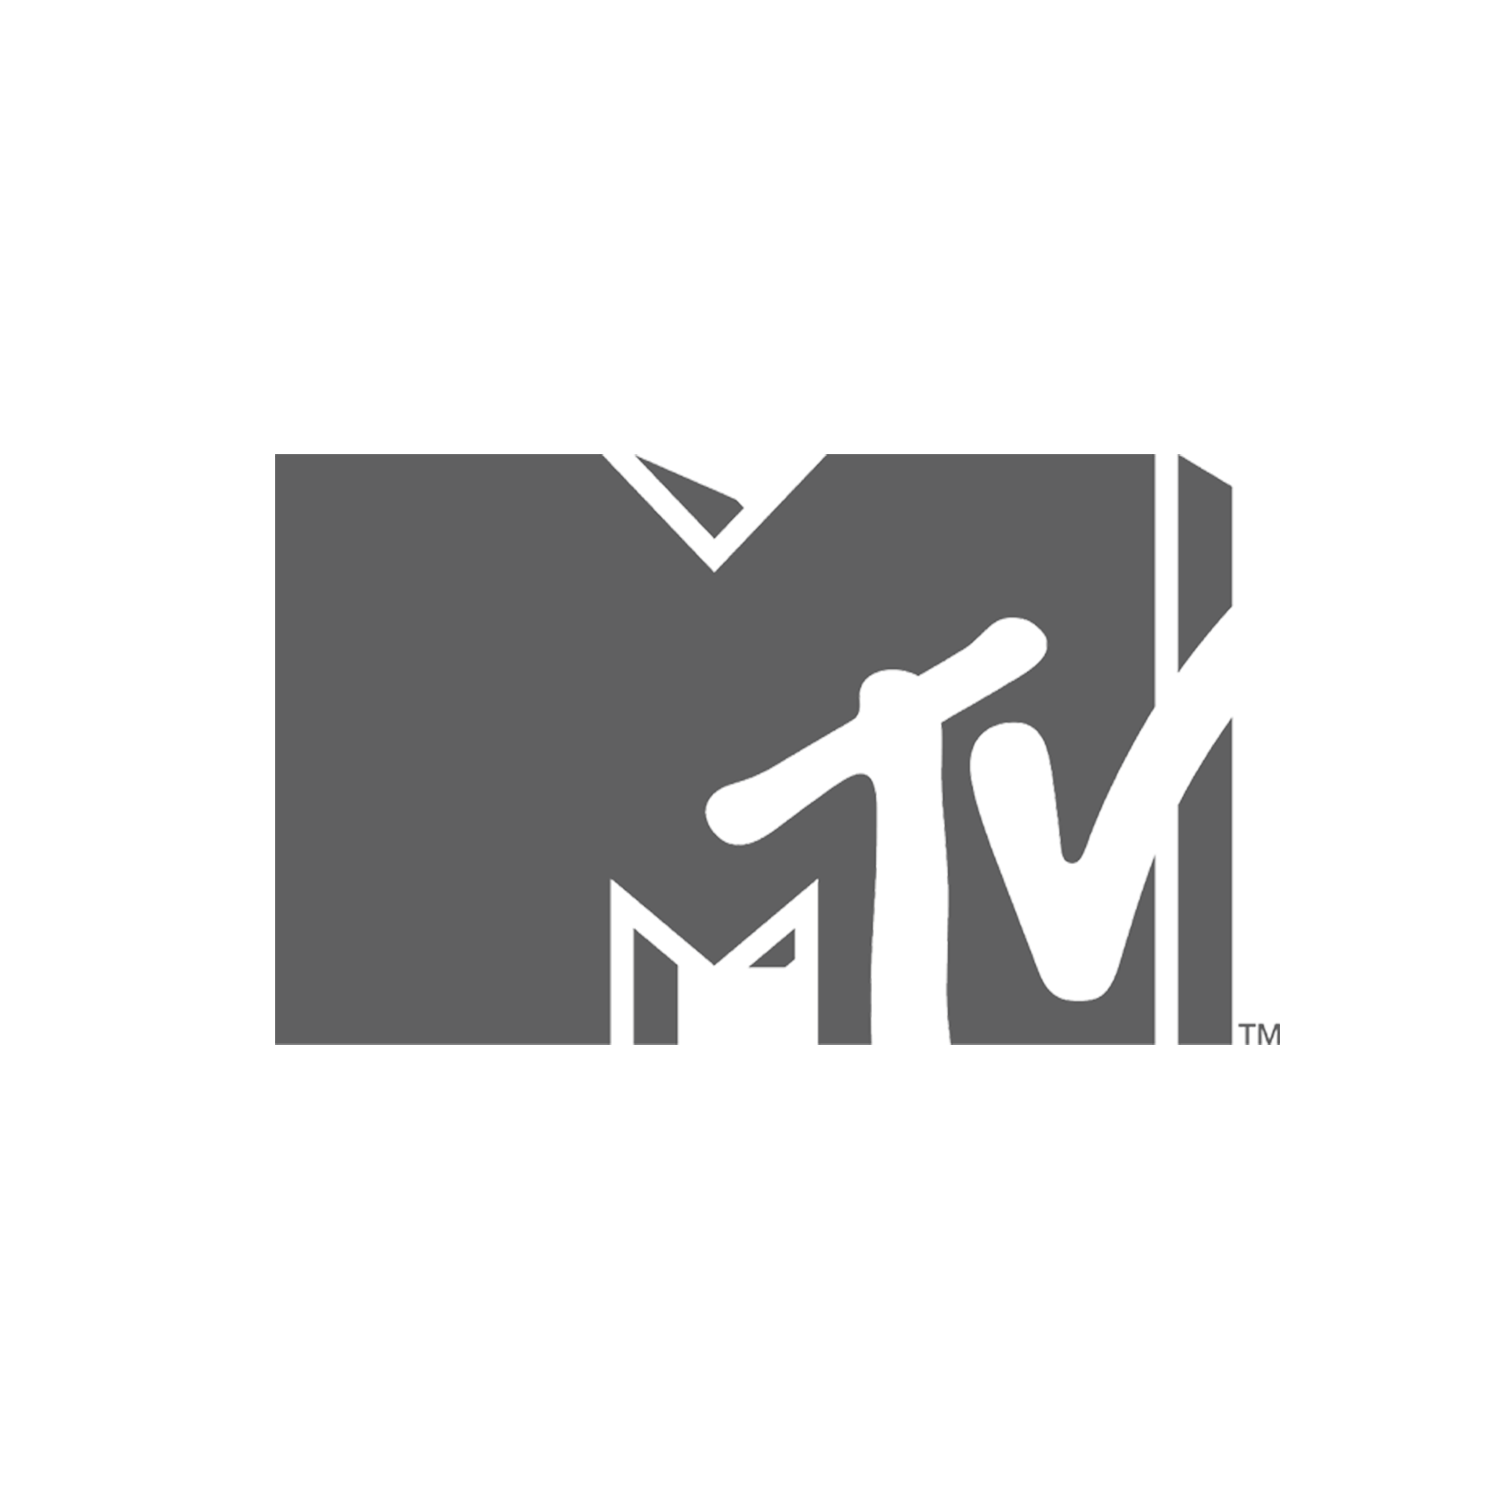 mtv.png